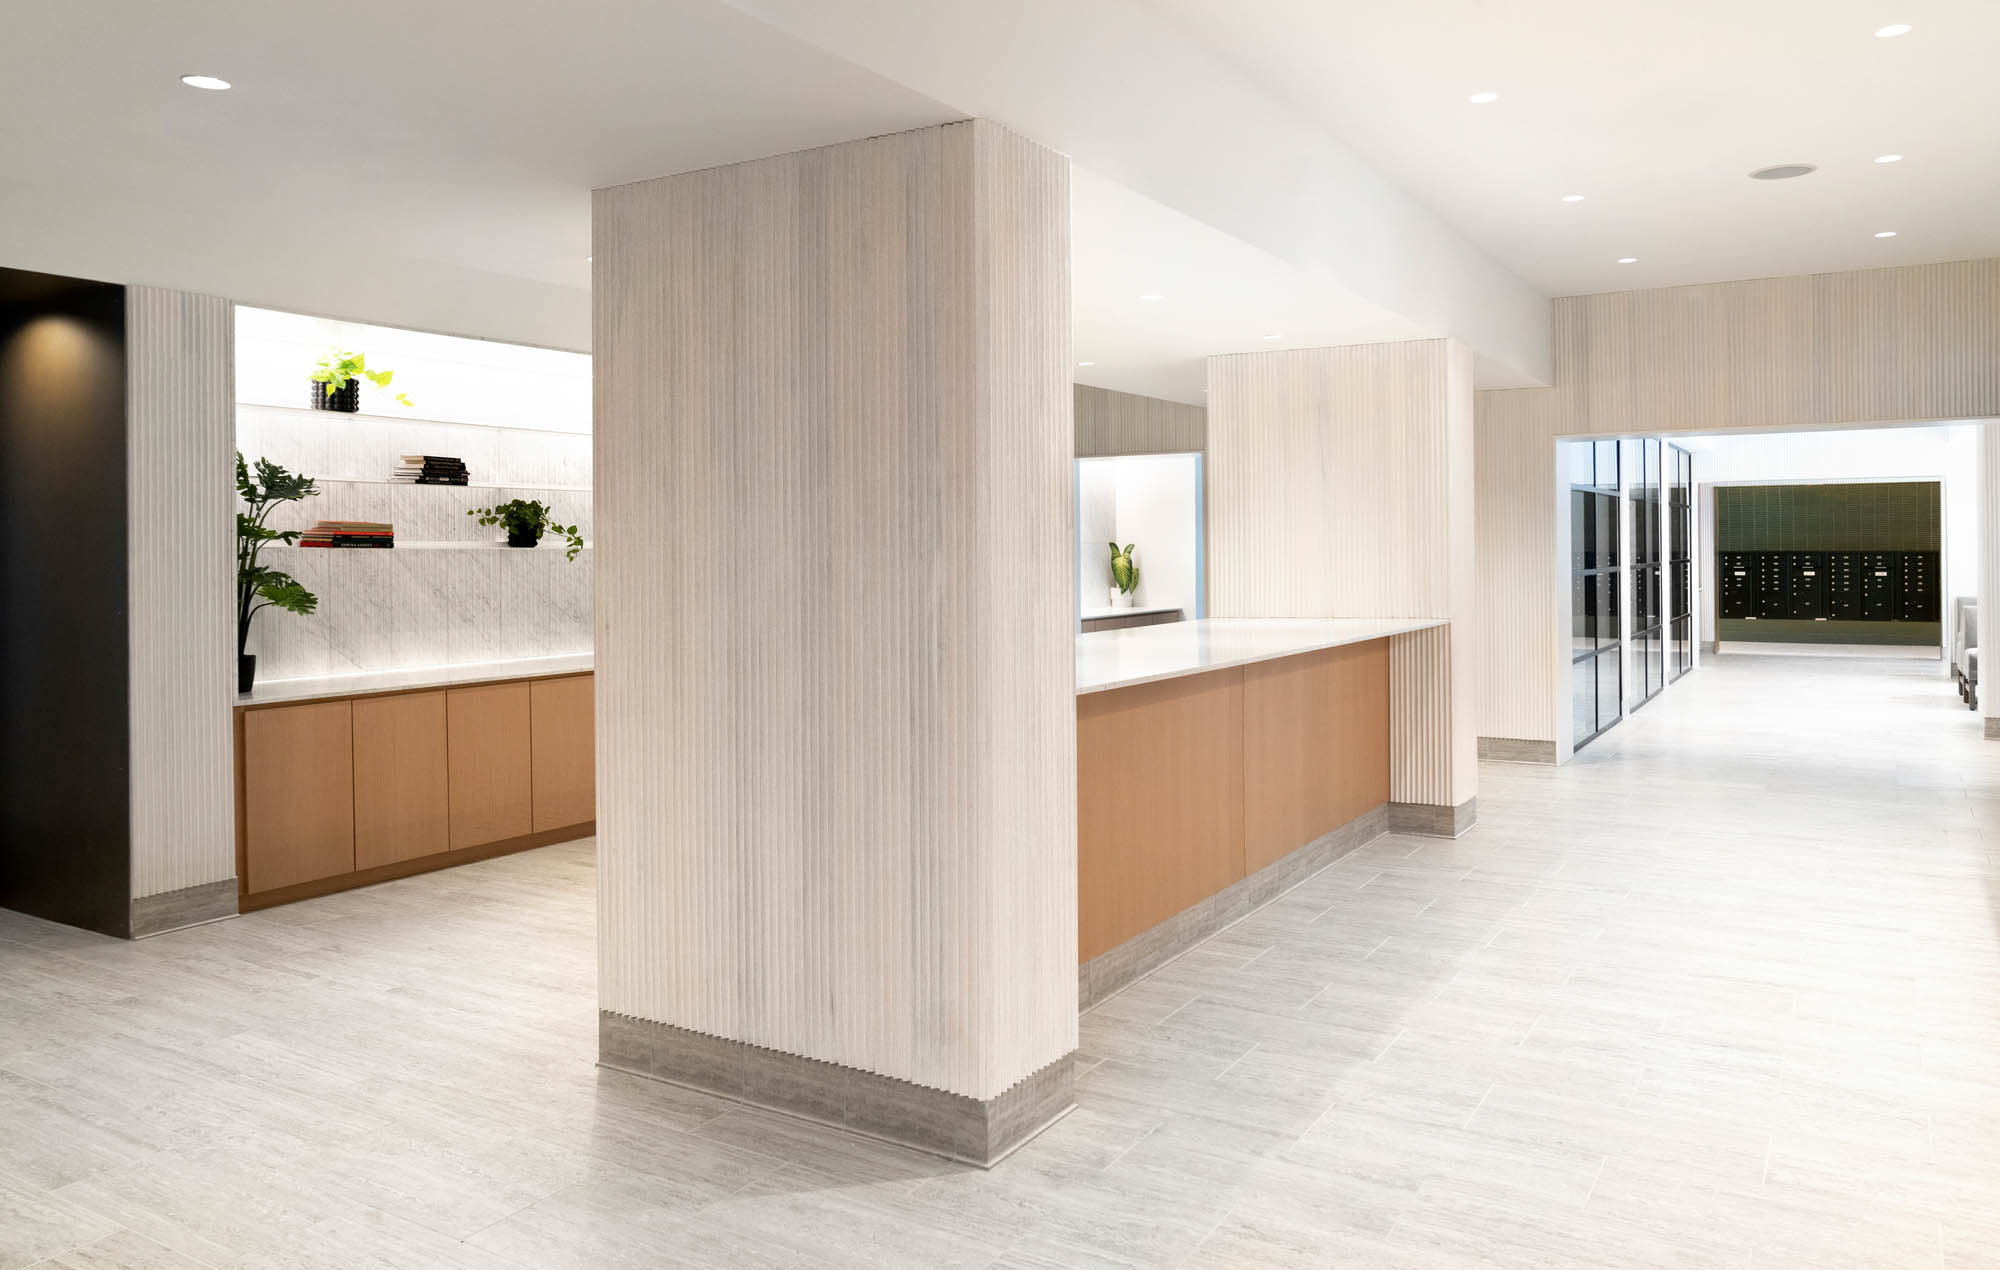 A large kitchen and entertainment space, with white counters, marble pillars sectioning off the kitchen leading to more space further back